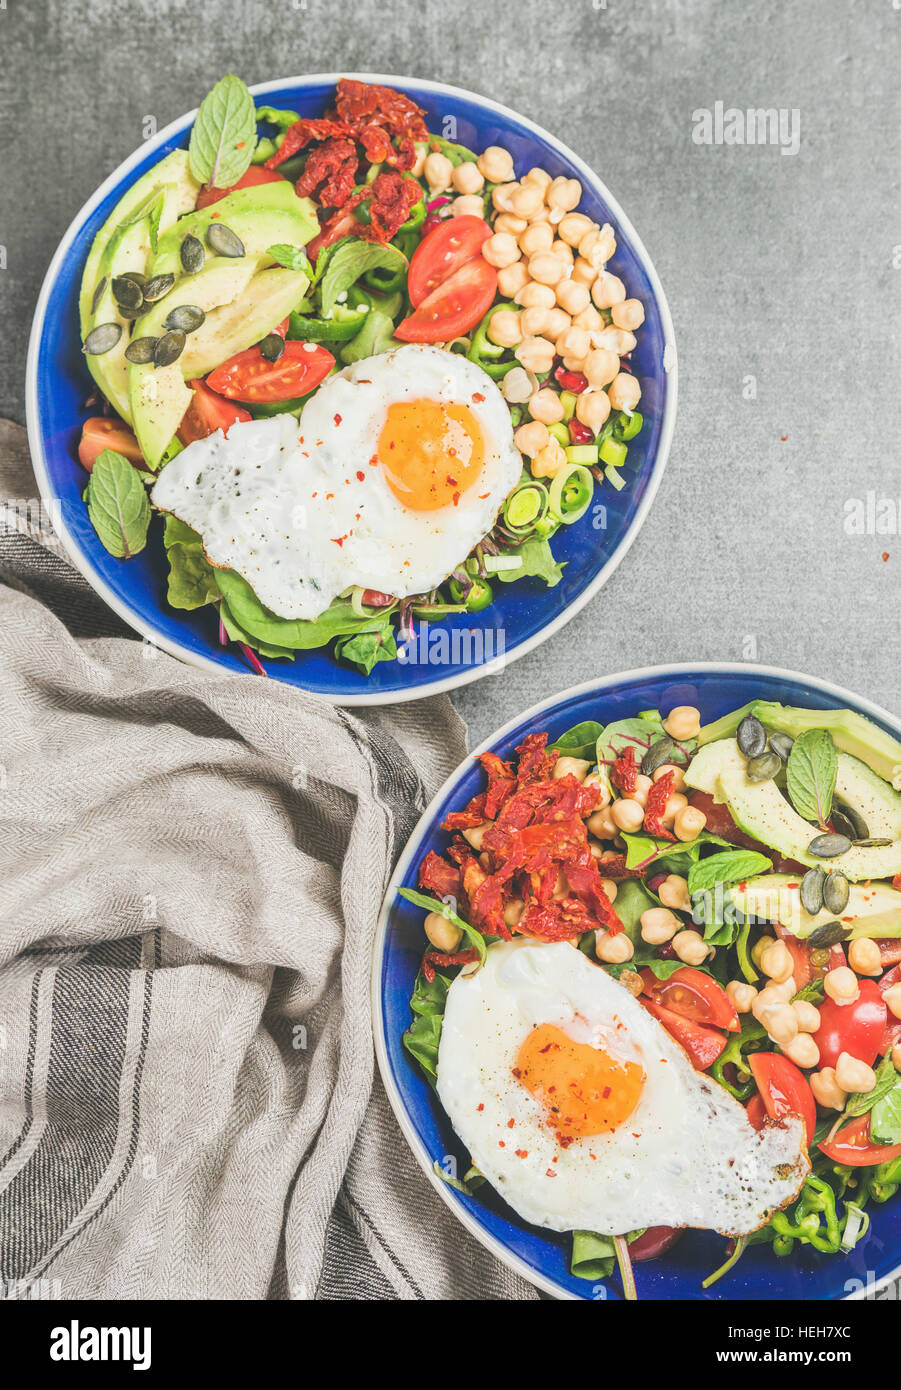 Healthy breakfast bowls with fried egg, chickpea sprouts, seeds, fresh vegetables and greens over grey concrete background, top view. Clean eating, di Stock Photo